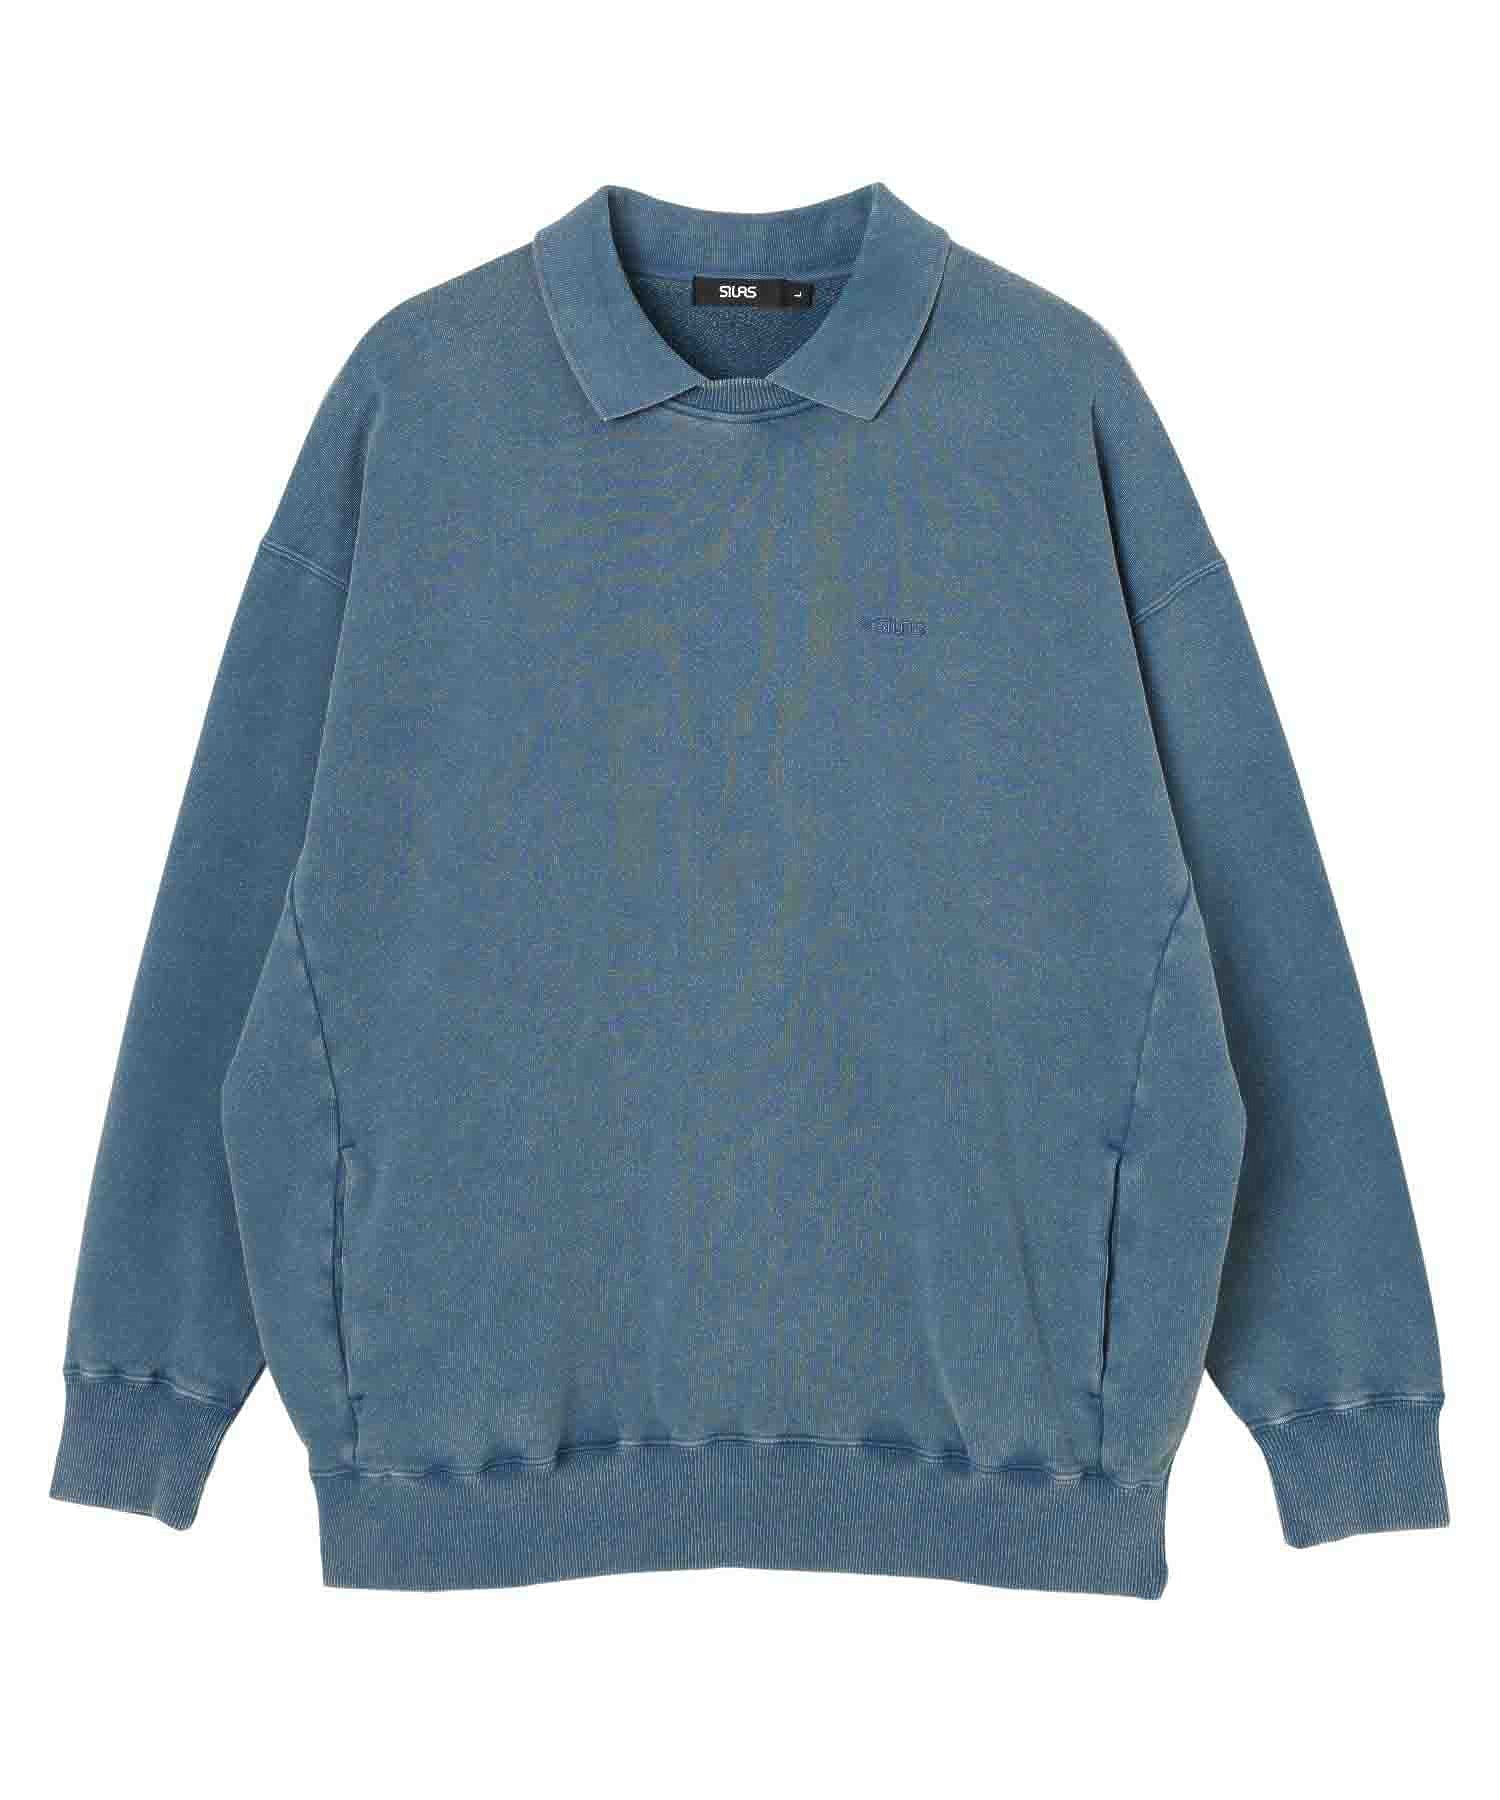 GARMENT DYED WIDE COLLARED TOP SILAS